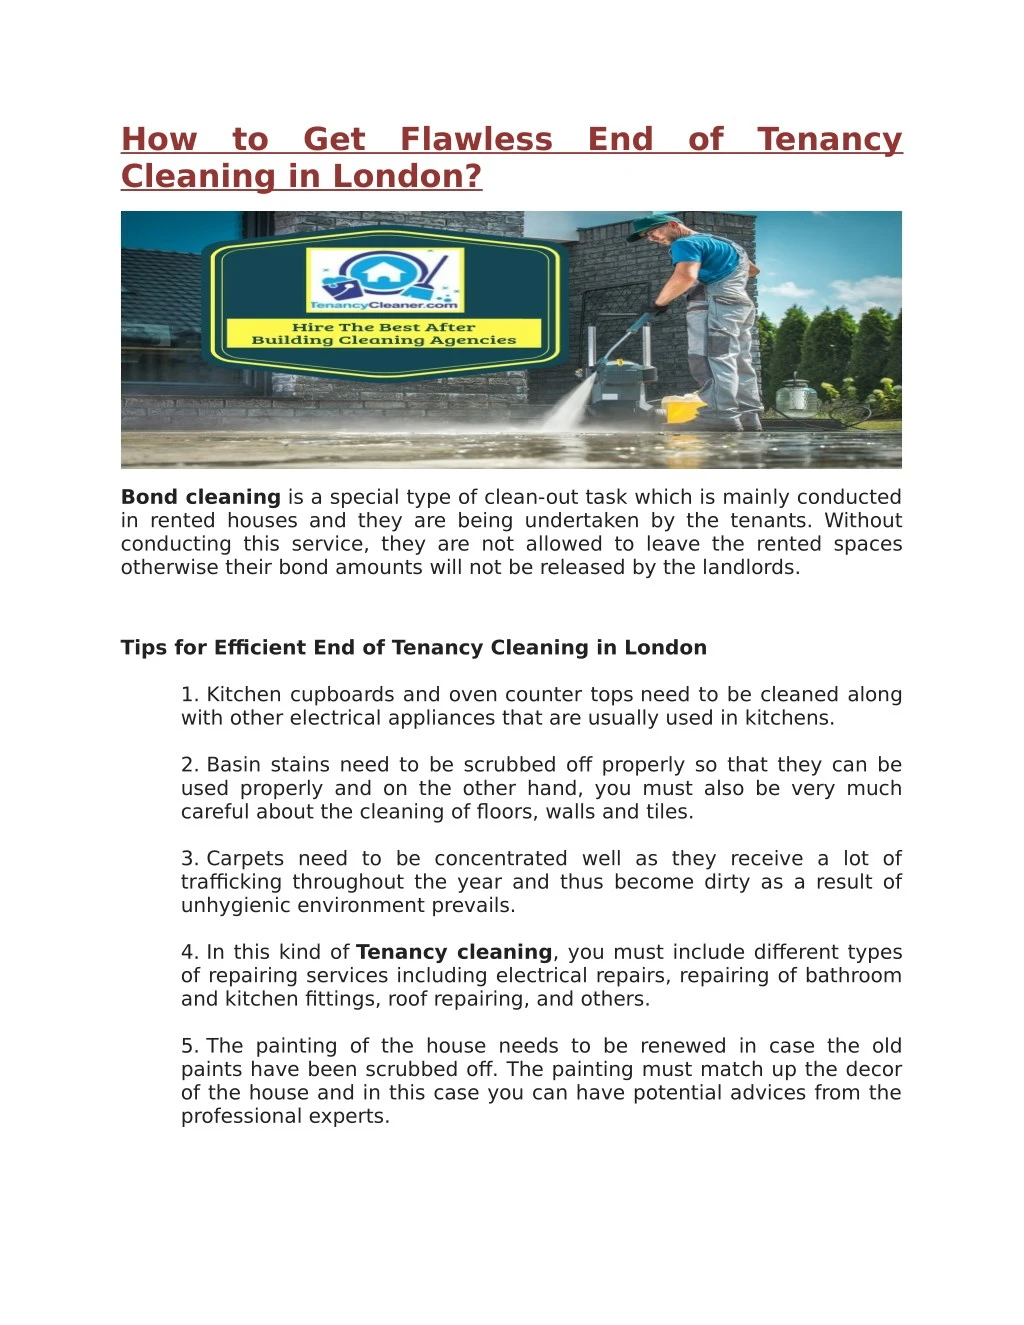 how to get flawless end of tenancy cleaning